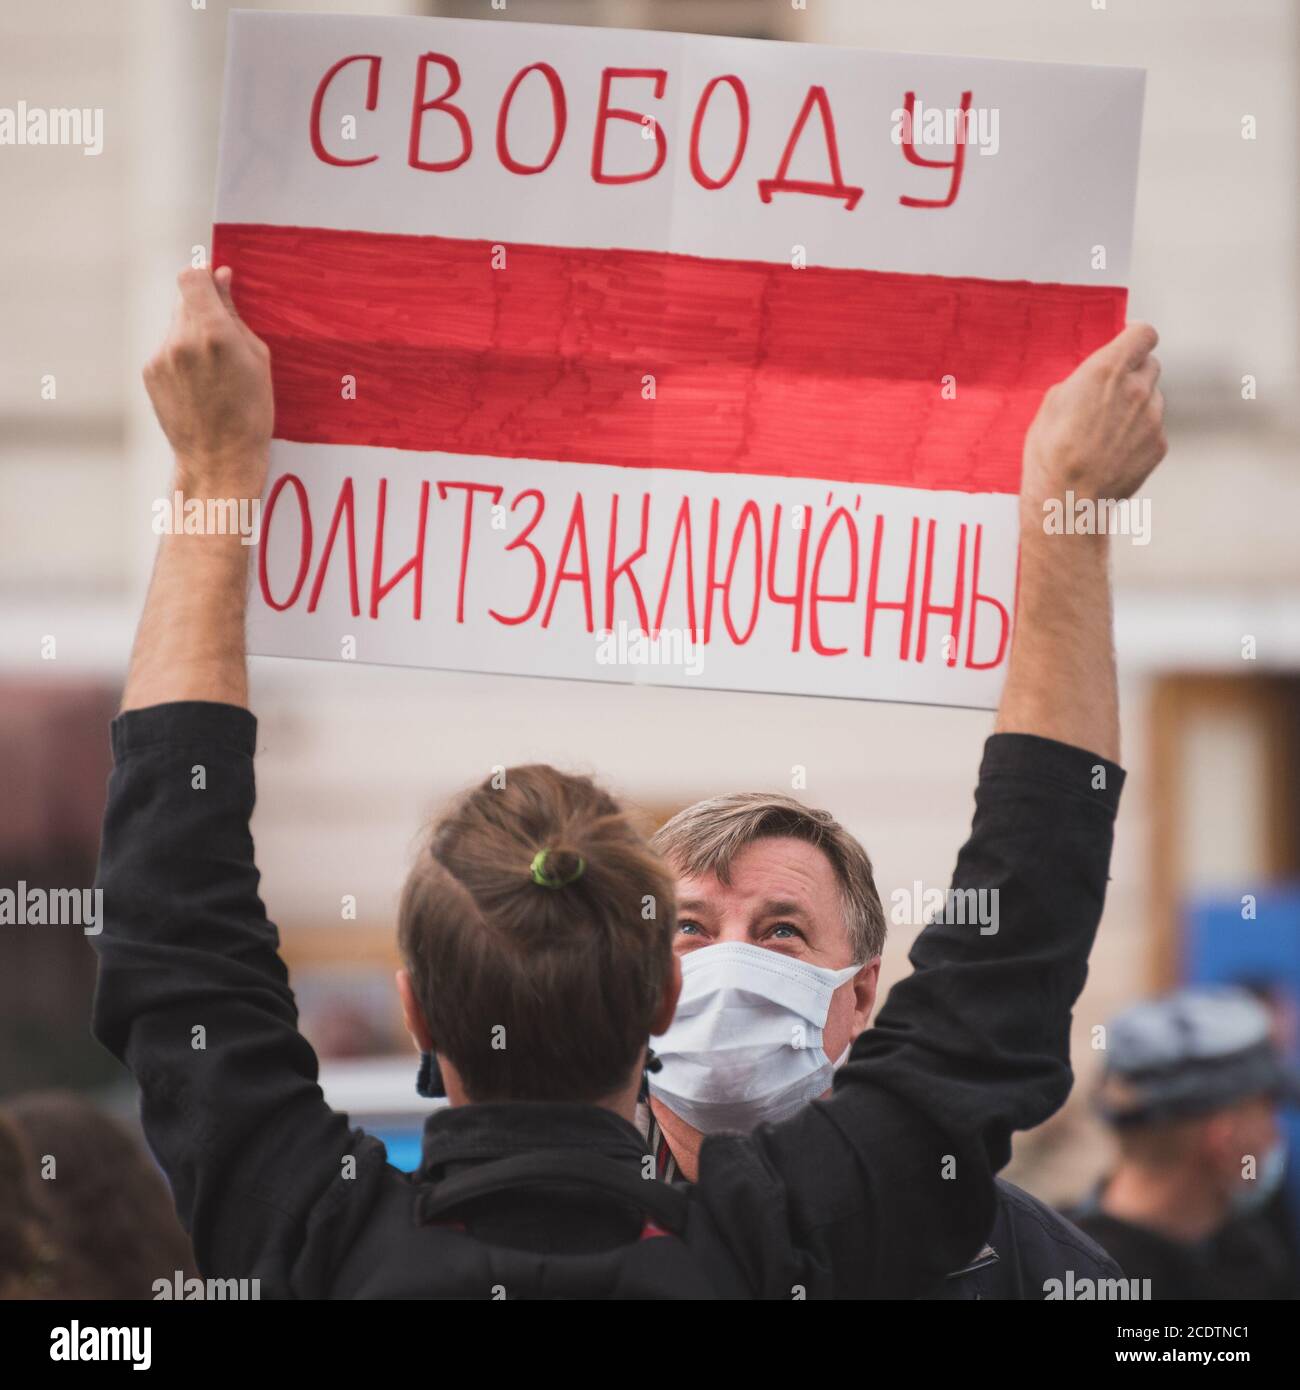 St Petersburg, Russia - August 29, 2020: a passerby looks at poster in hands of protester. Stock Photo